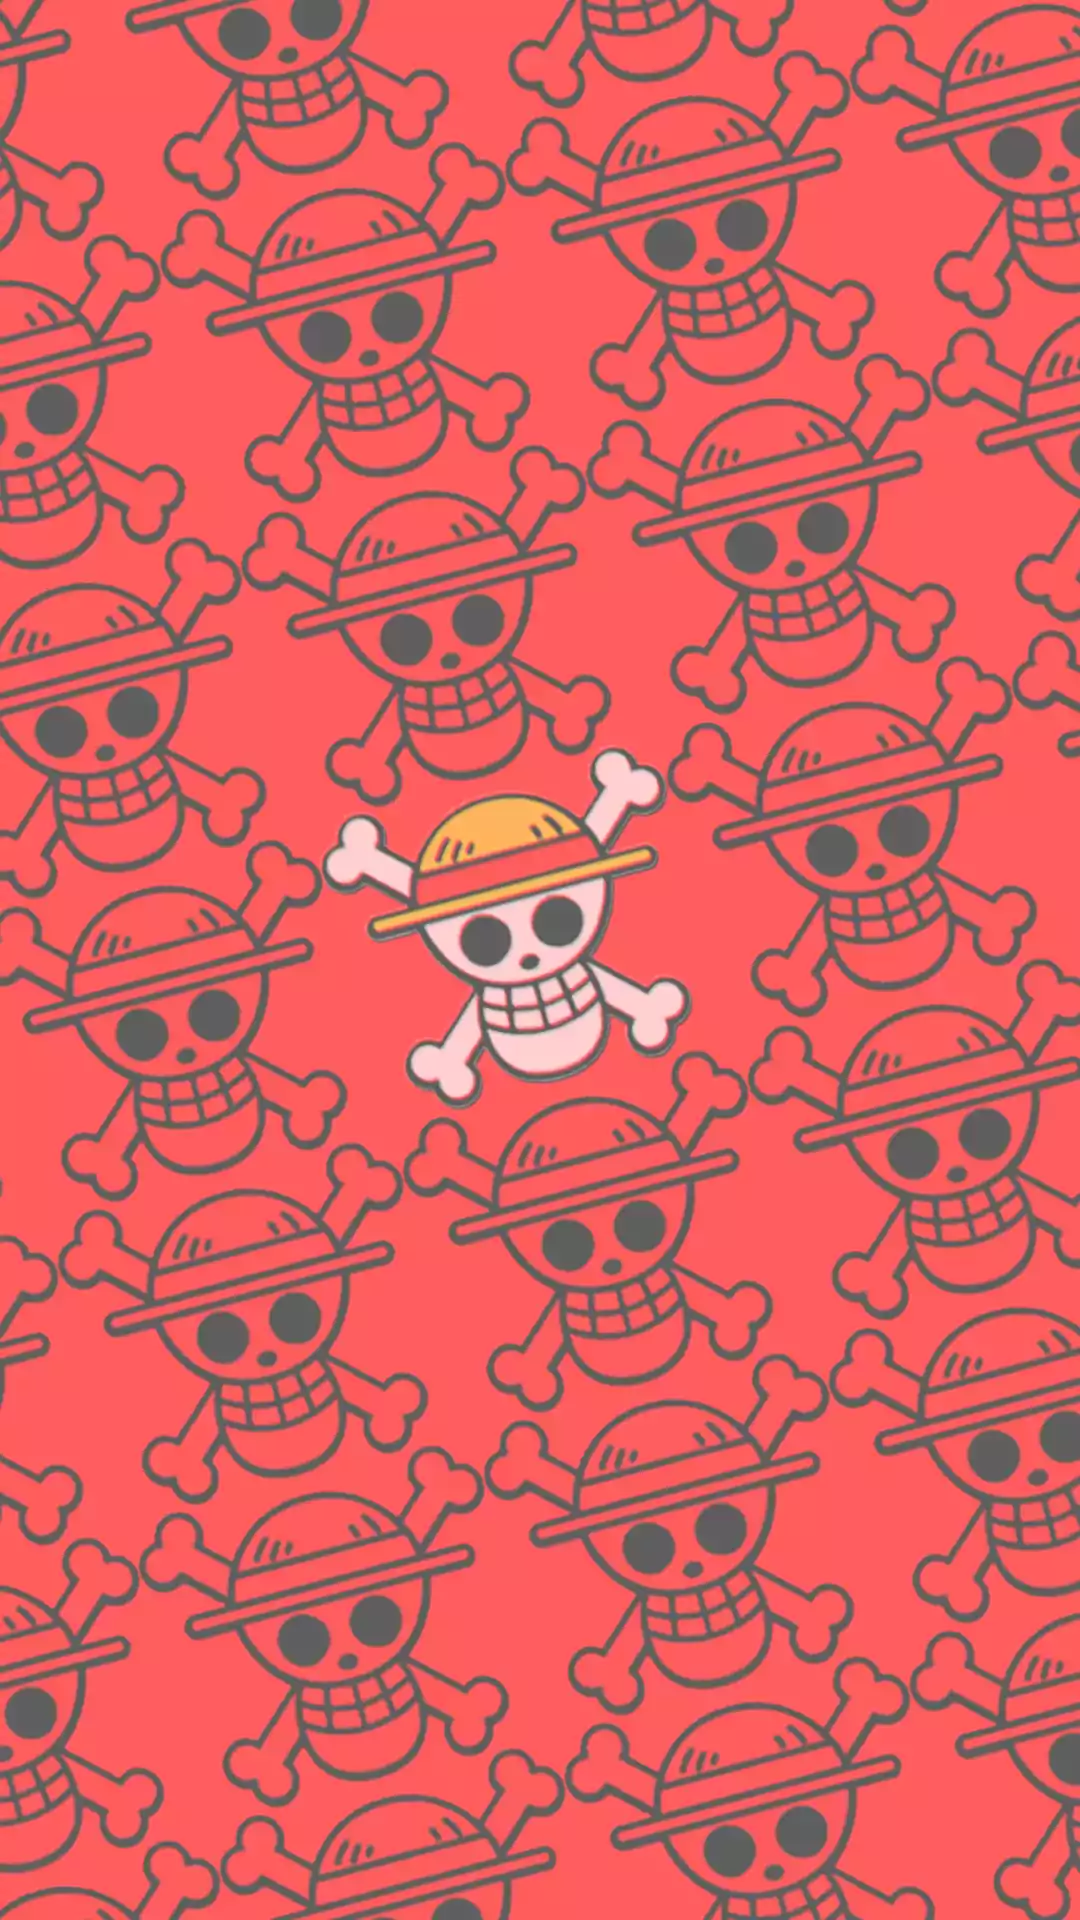 One Piece wallpaper 1080x1920 for android - One Piece